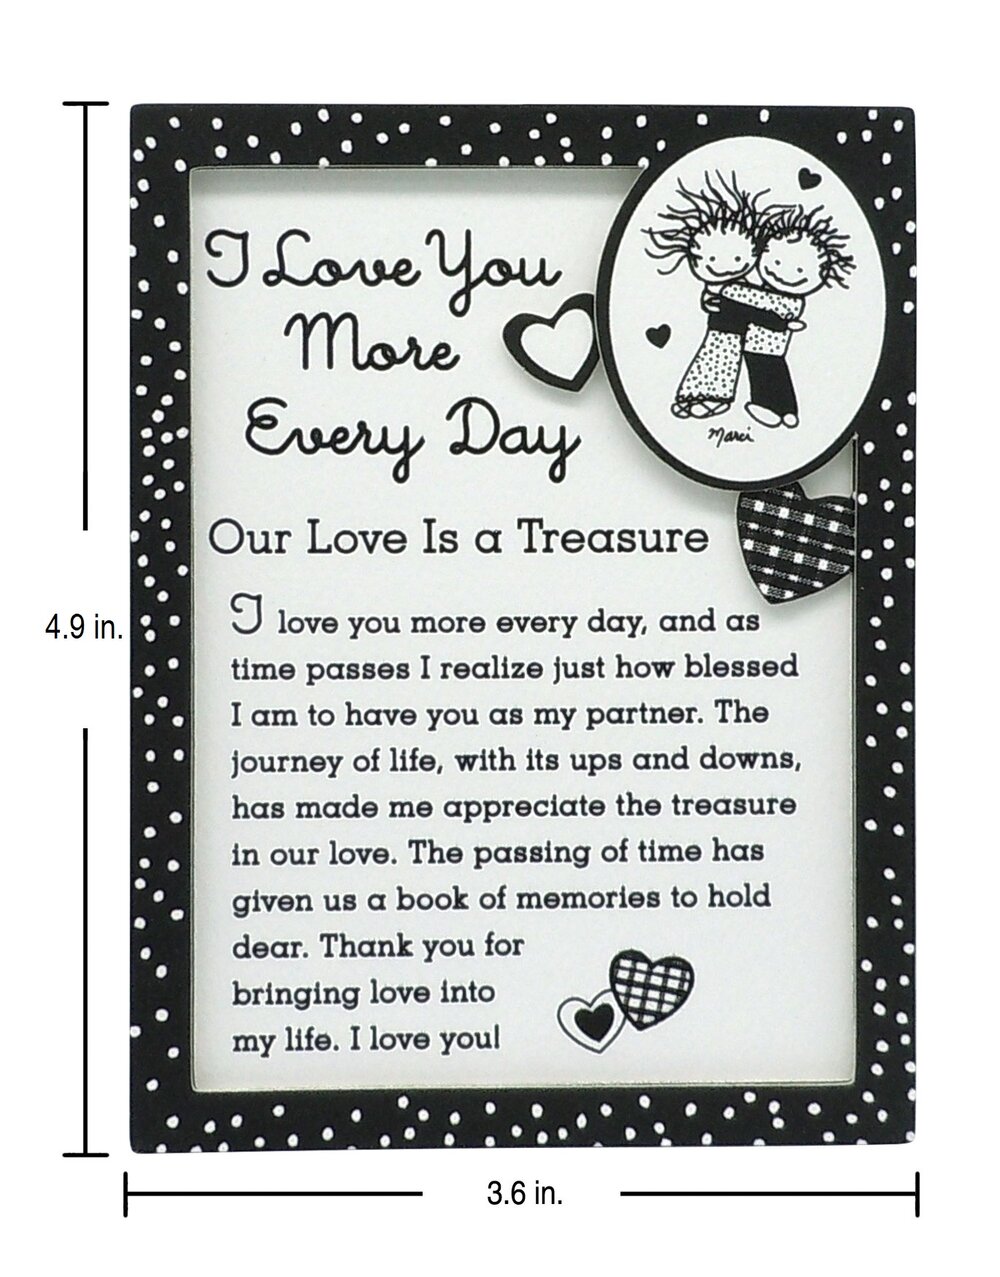 I Love You More Every Day by Marci — Blue Mountain Arts